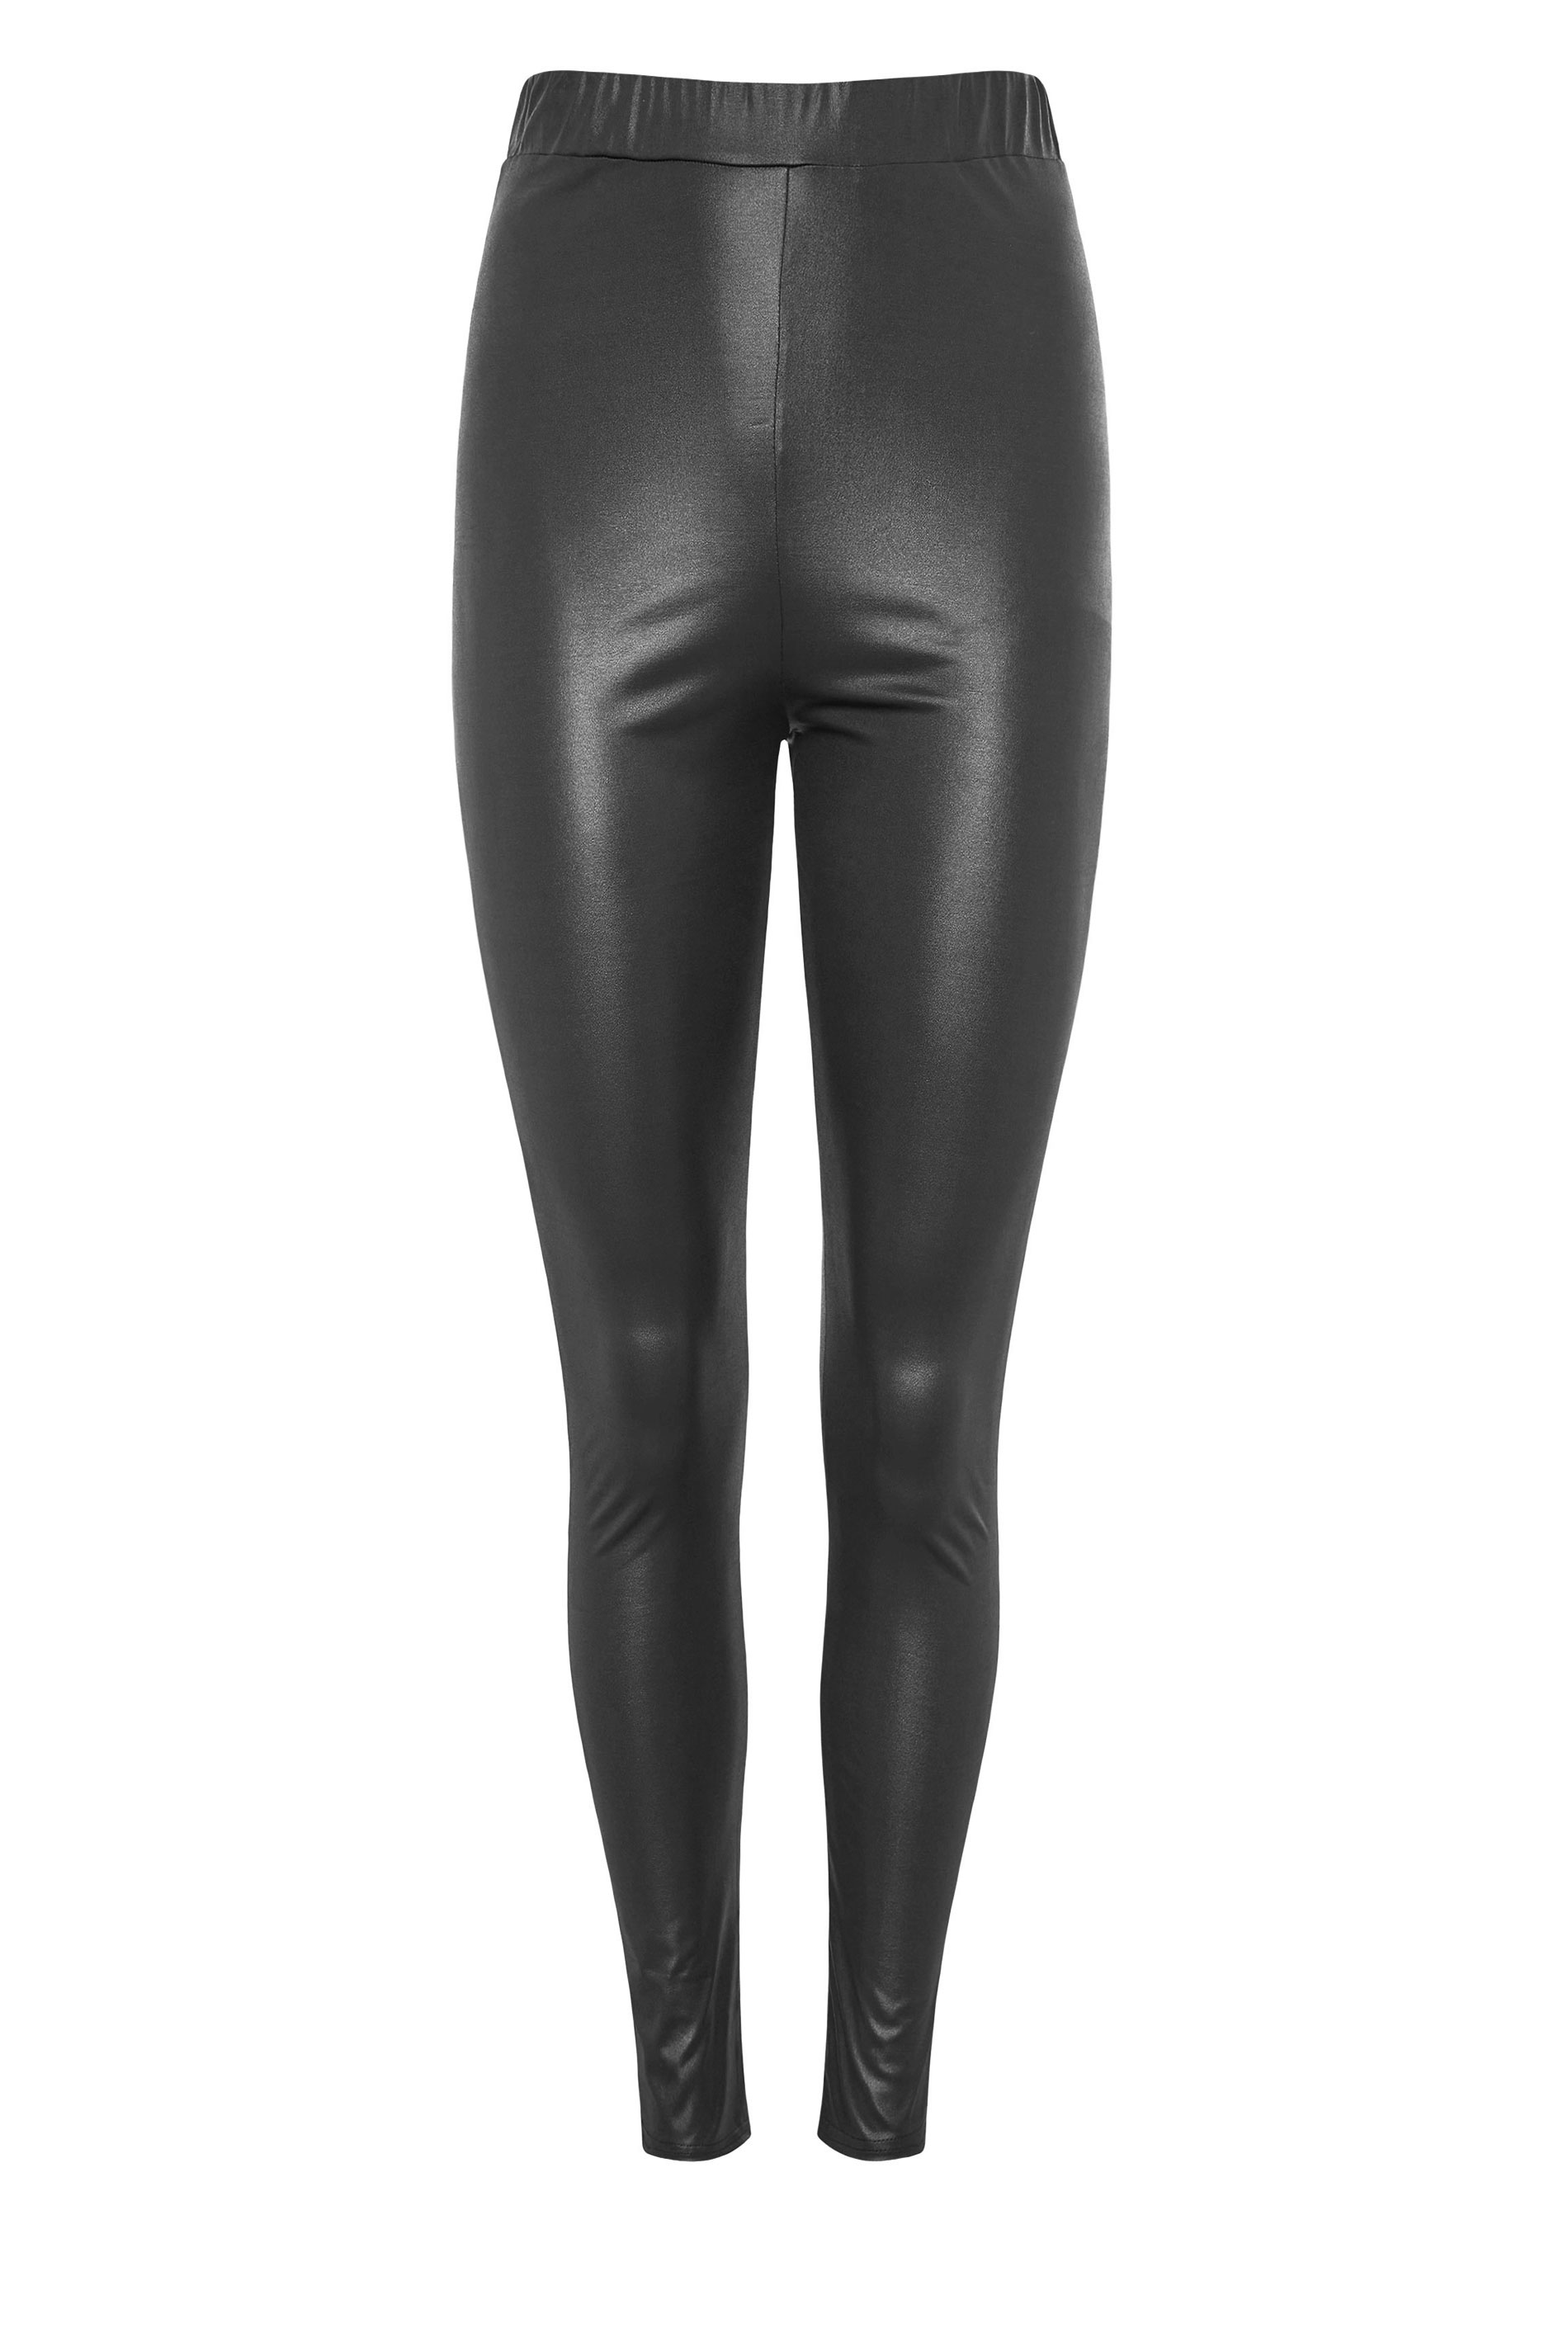 New Look Tall Leather Leggings Women's